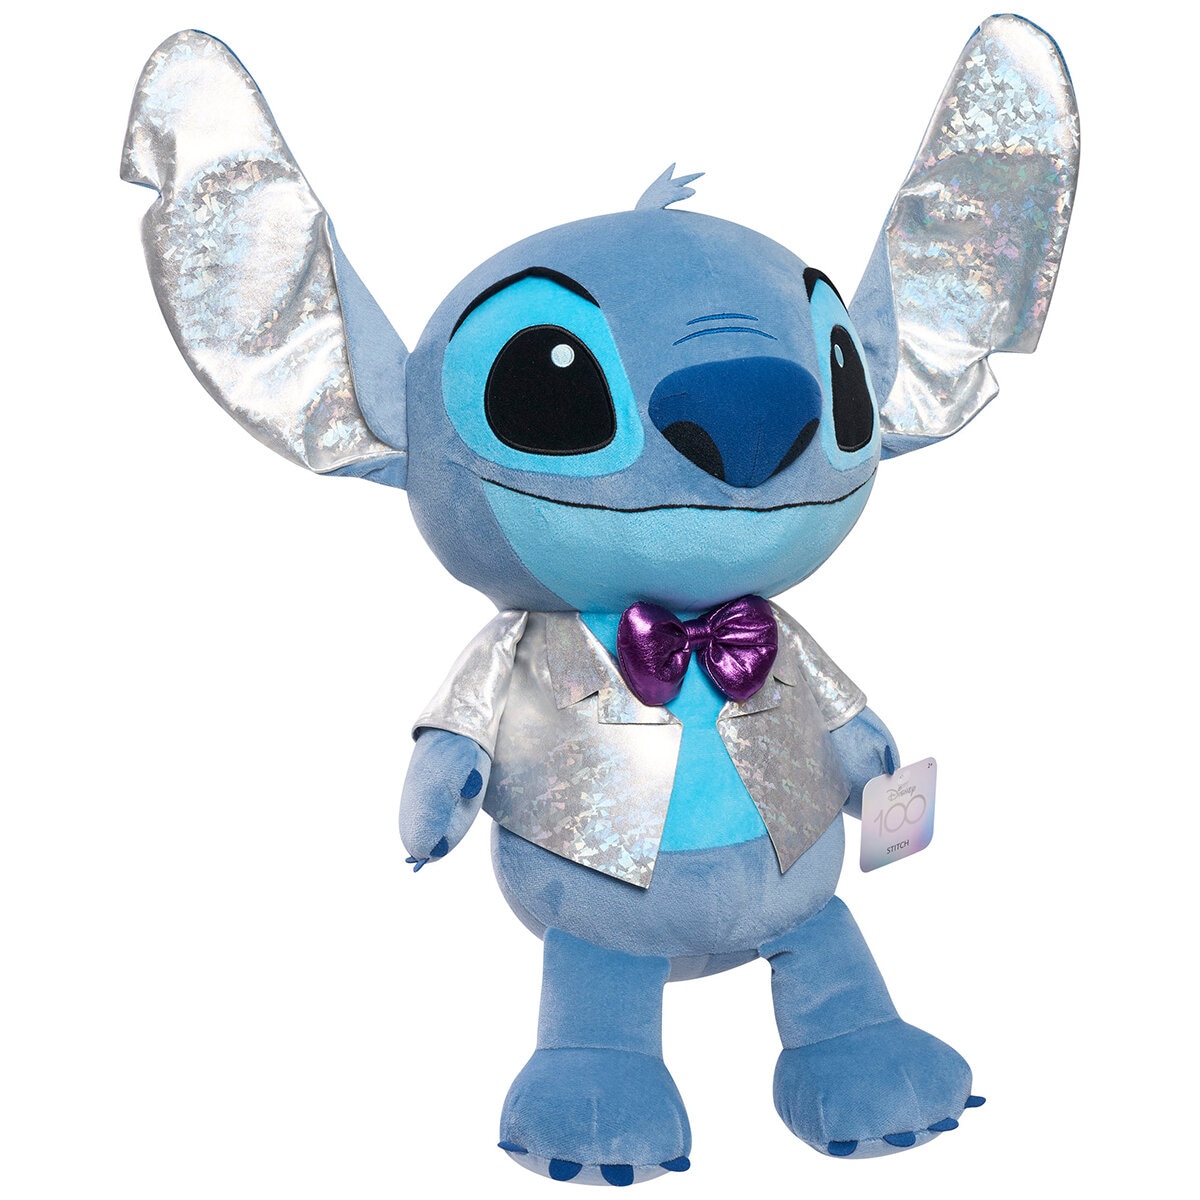 Japan Disney Friends Of Beans Collection Stitch Plush Doll